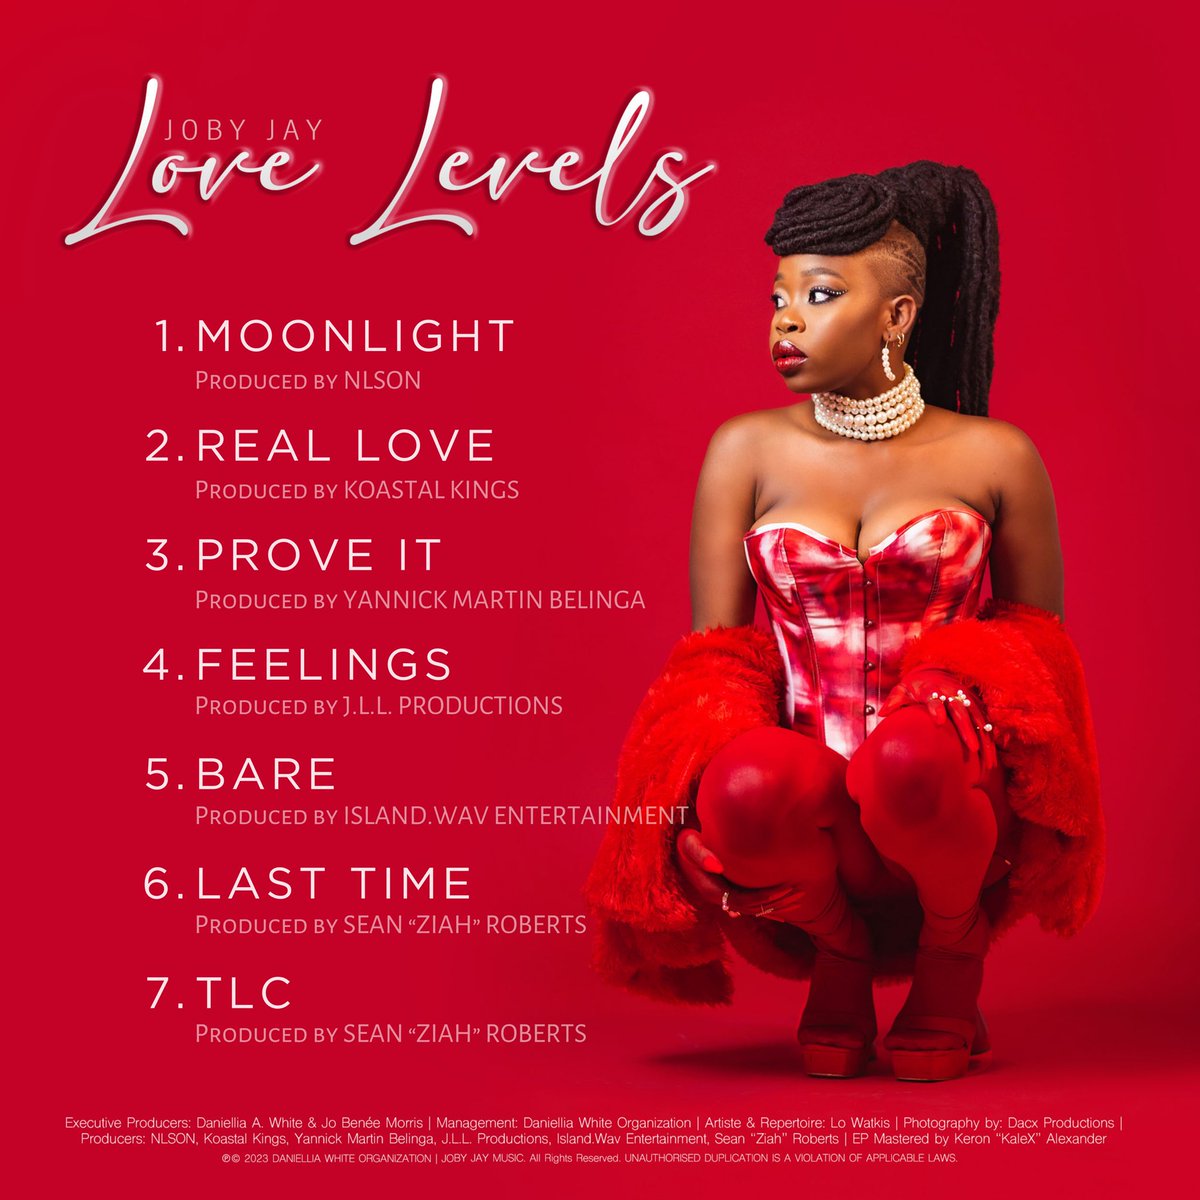 MY 1st project, ‘LOVE LEVELS’ ❣️ will be out NEXT FRIDAY, on the 14th of April. God is so good. Wow.

#LOVELEVELSagenda #womeninmusic #debutEP #JobyJayMusic #DanWhiteOrg